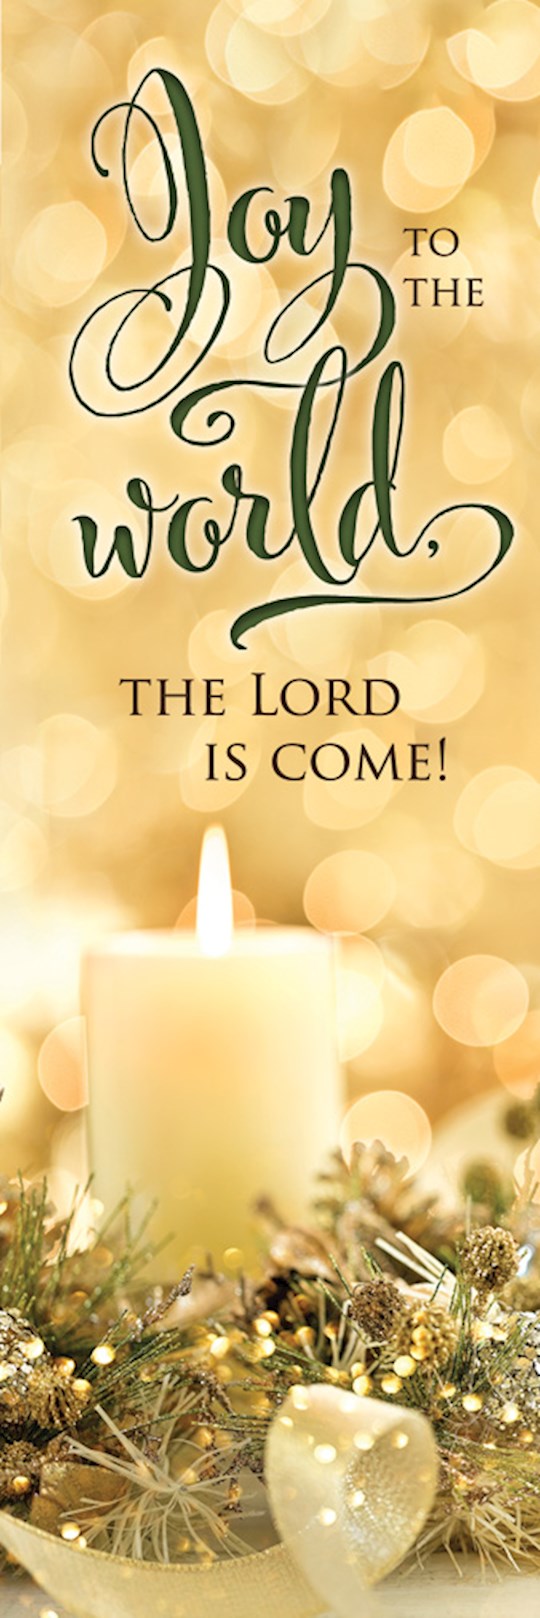 {=Bookmark-Joy To The World  The Lord Is Come! (Luke 2:10  KJV) (Pack Of 25)}